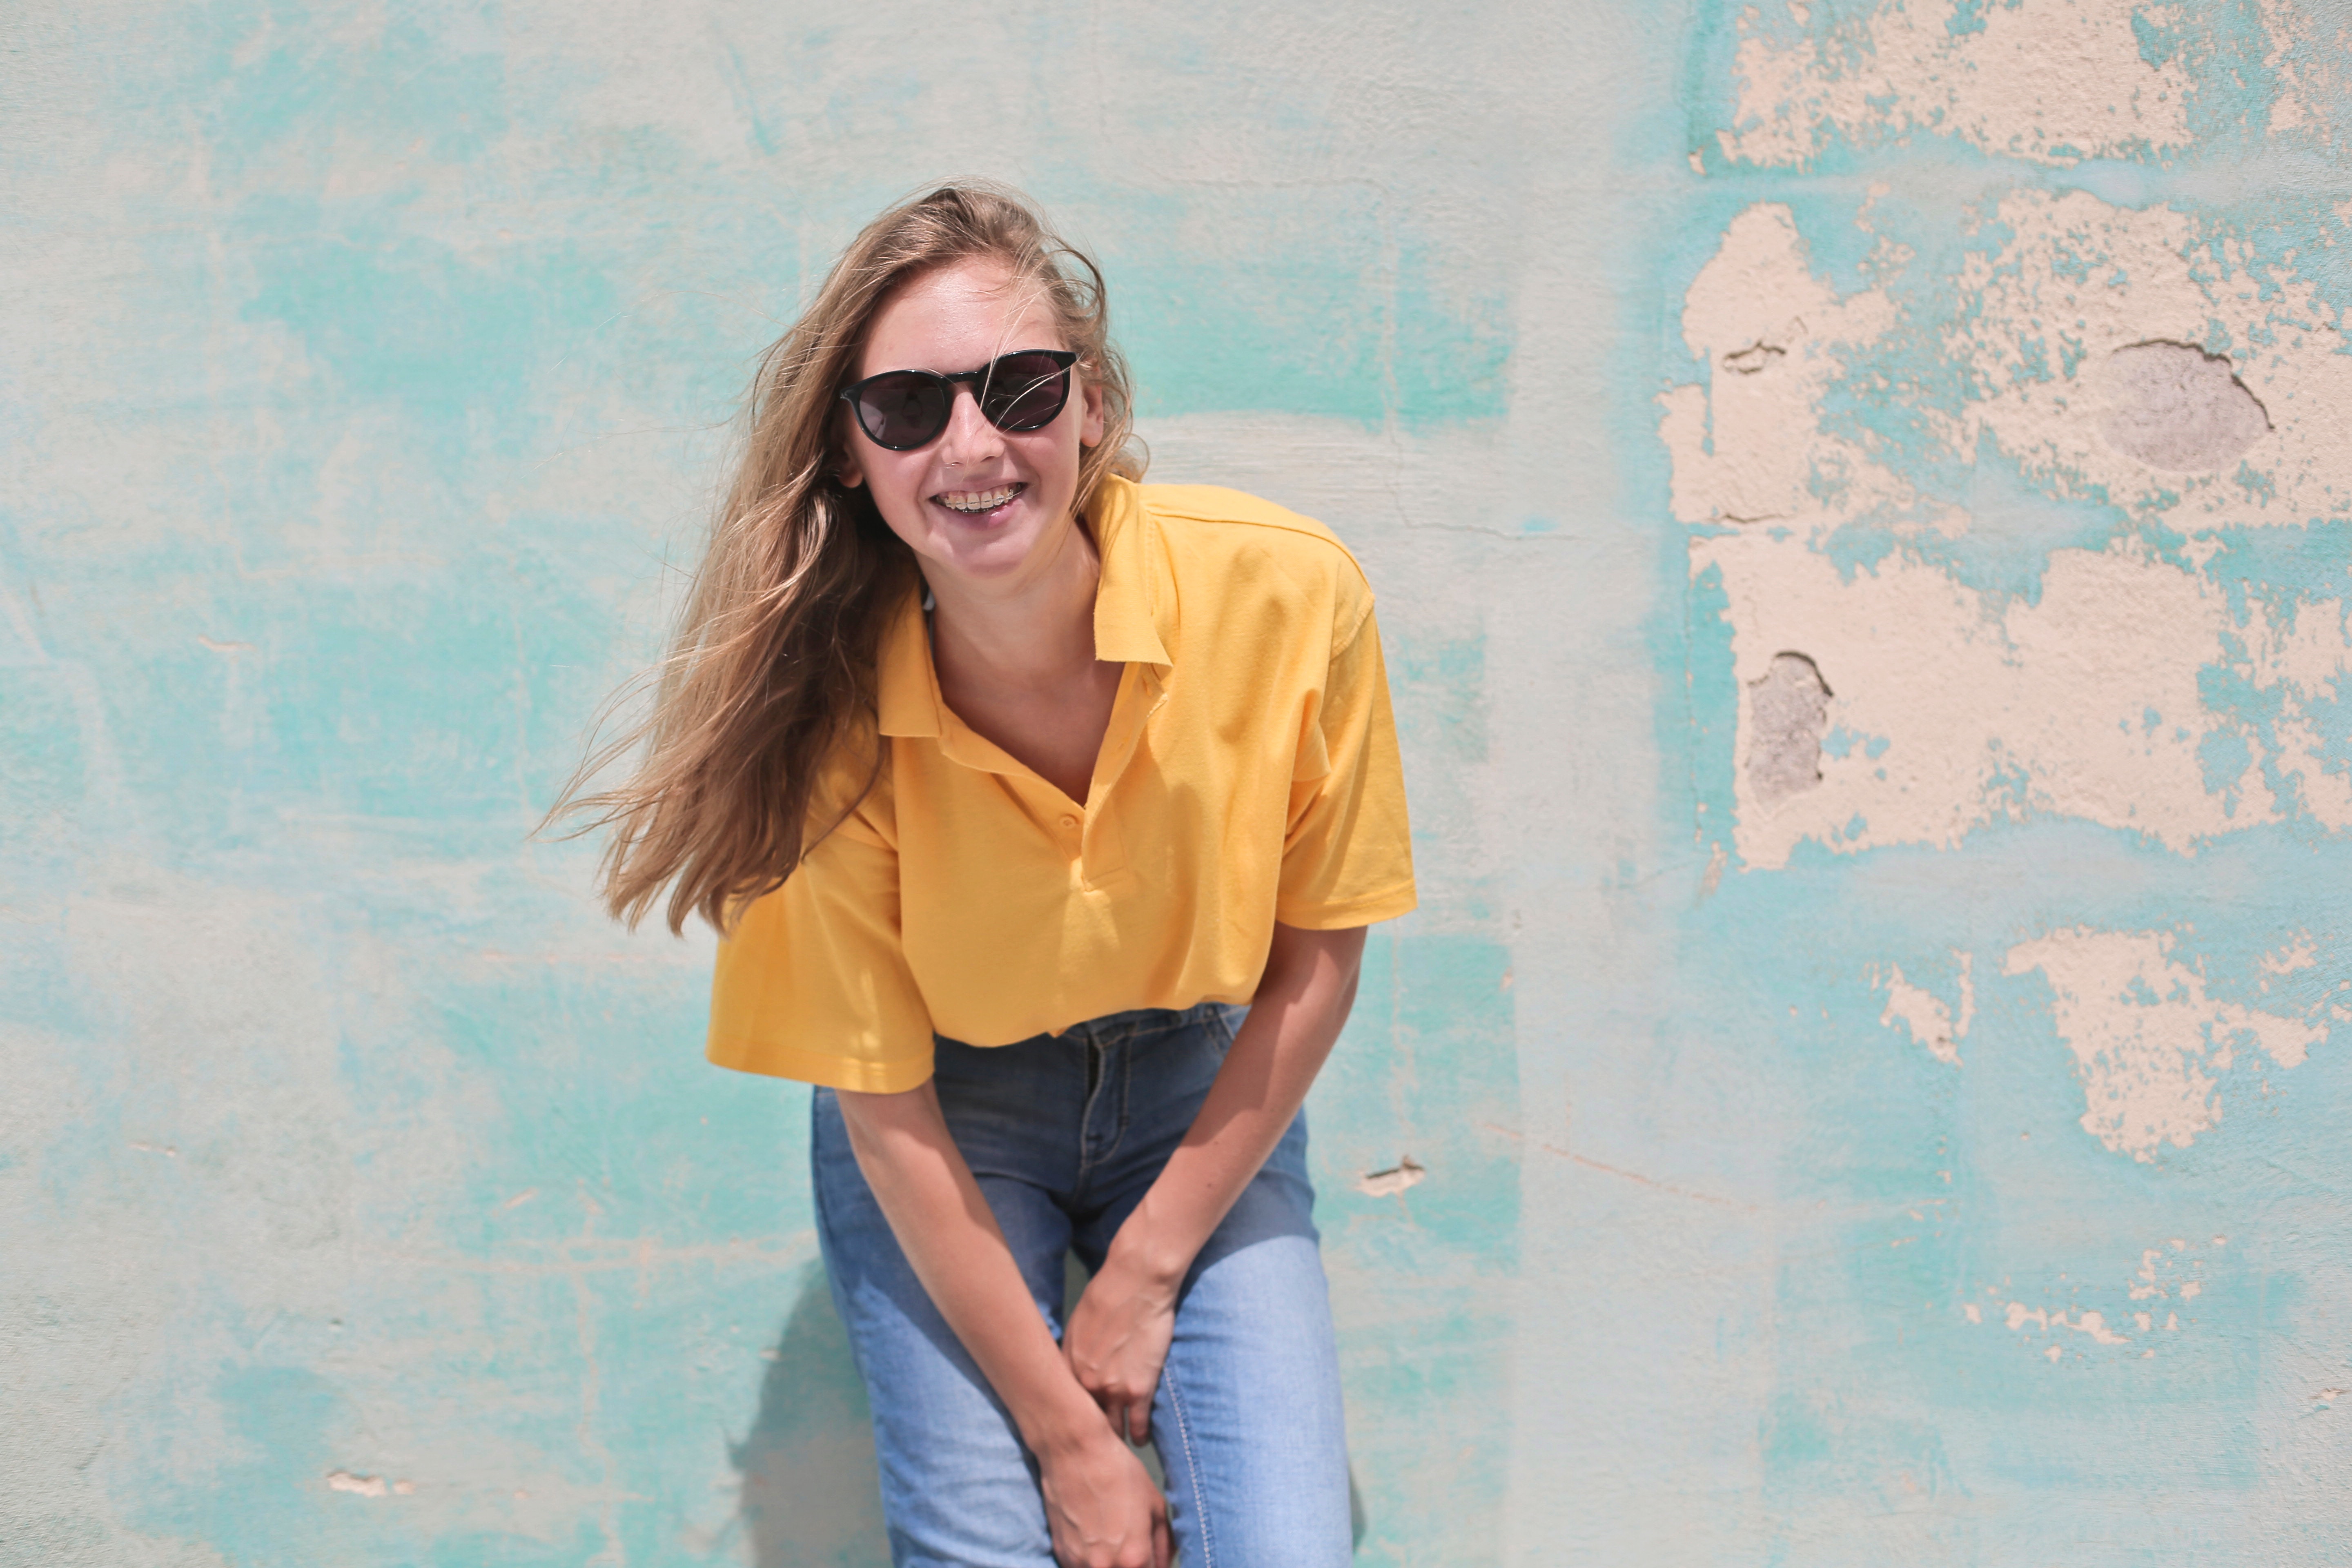 Woman wearing yellow polo shirt standing in front of teal concrete wall photo